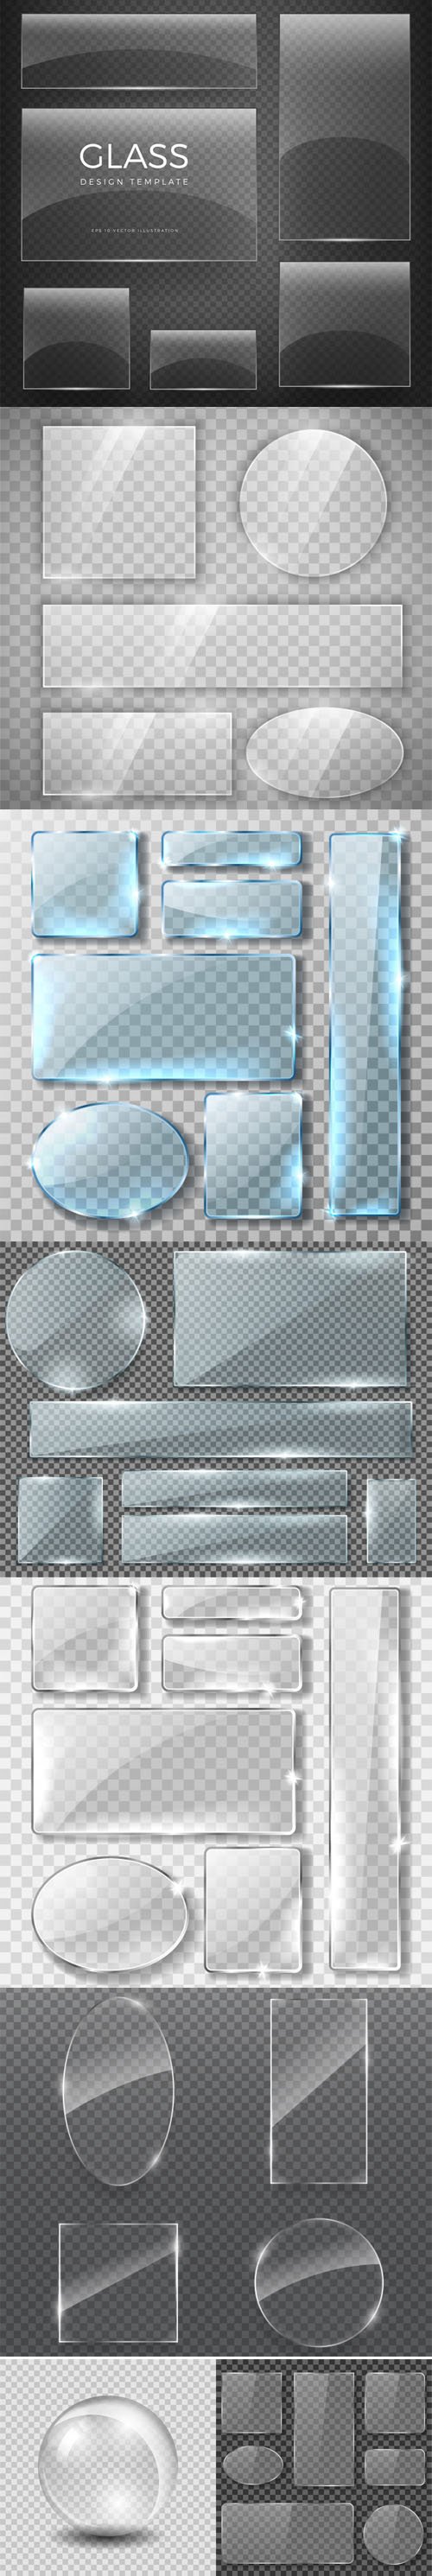 Realistic Transparent Glass Glossy Different Shapes in Vector